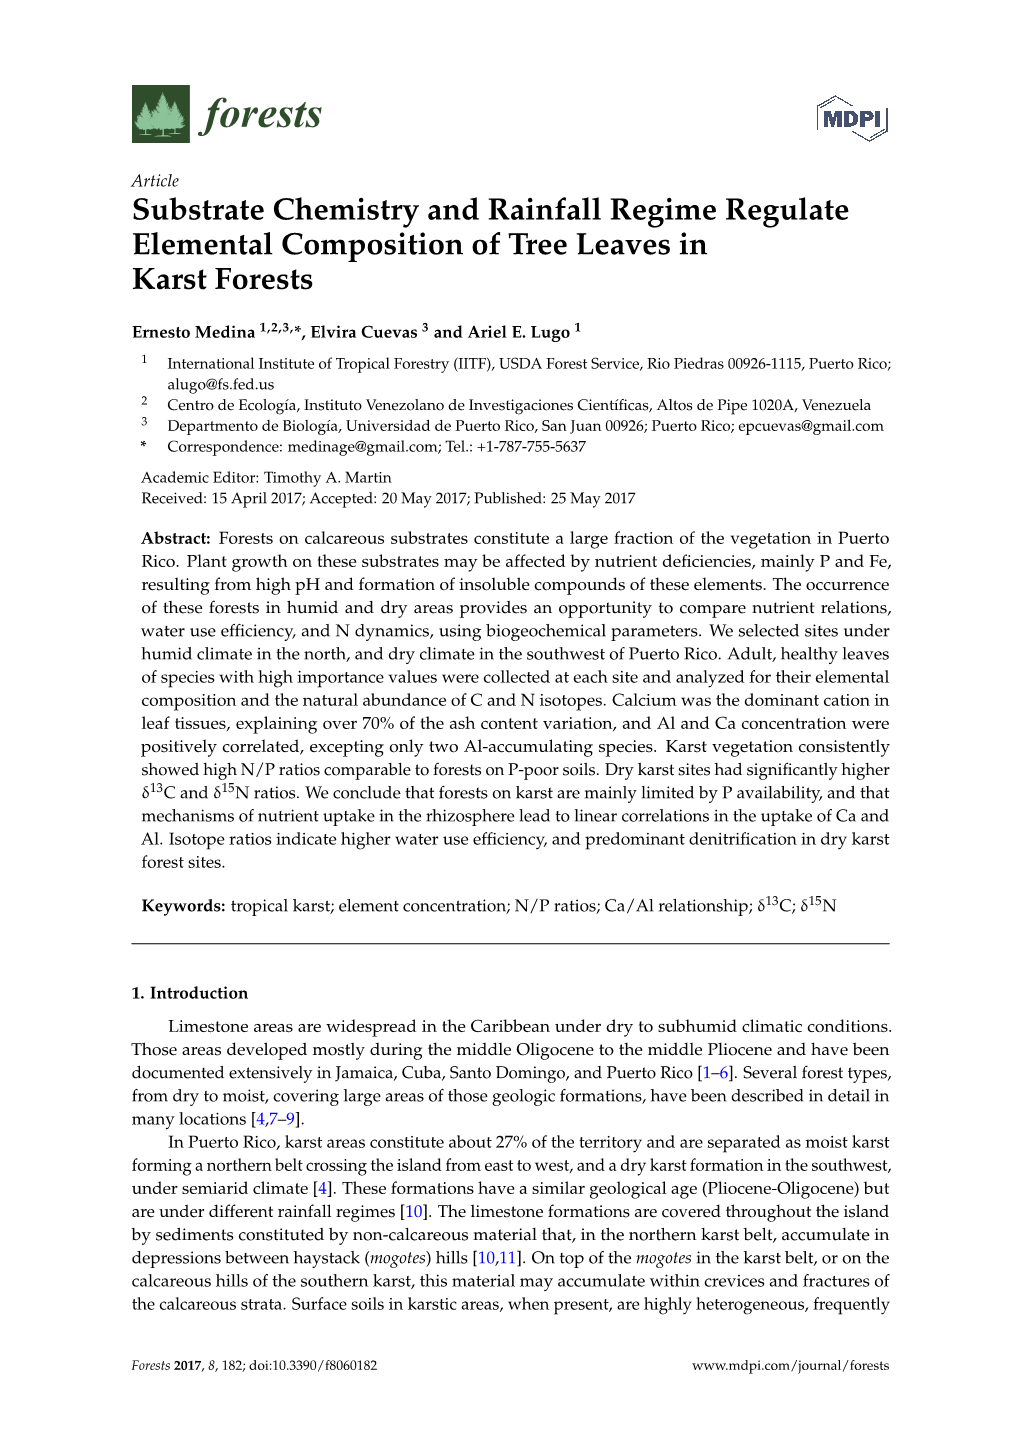 Substrate Chemistry and Rainfall Regime Regulate Elemental Composition of Tree Leaves in Karst Forests